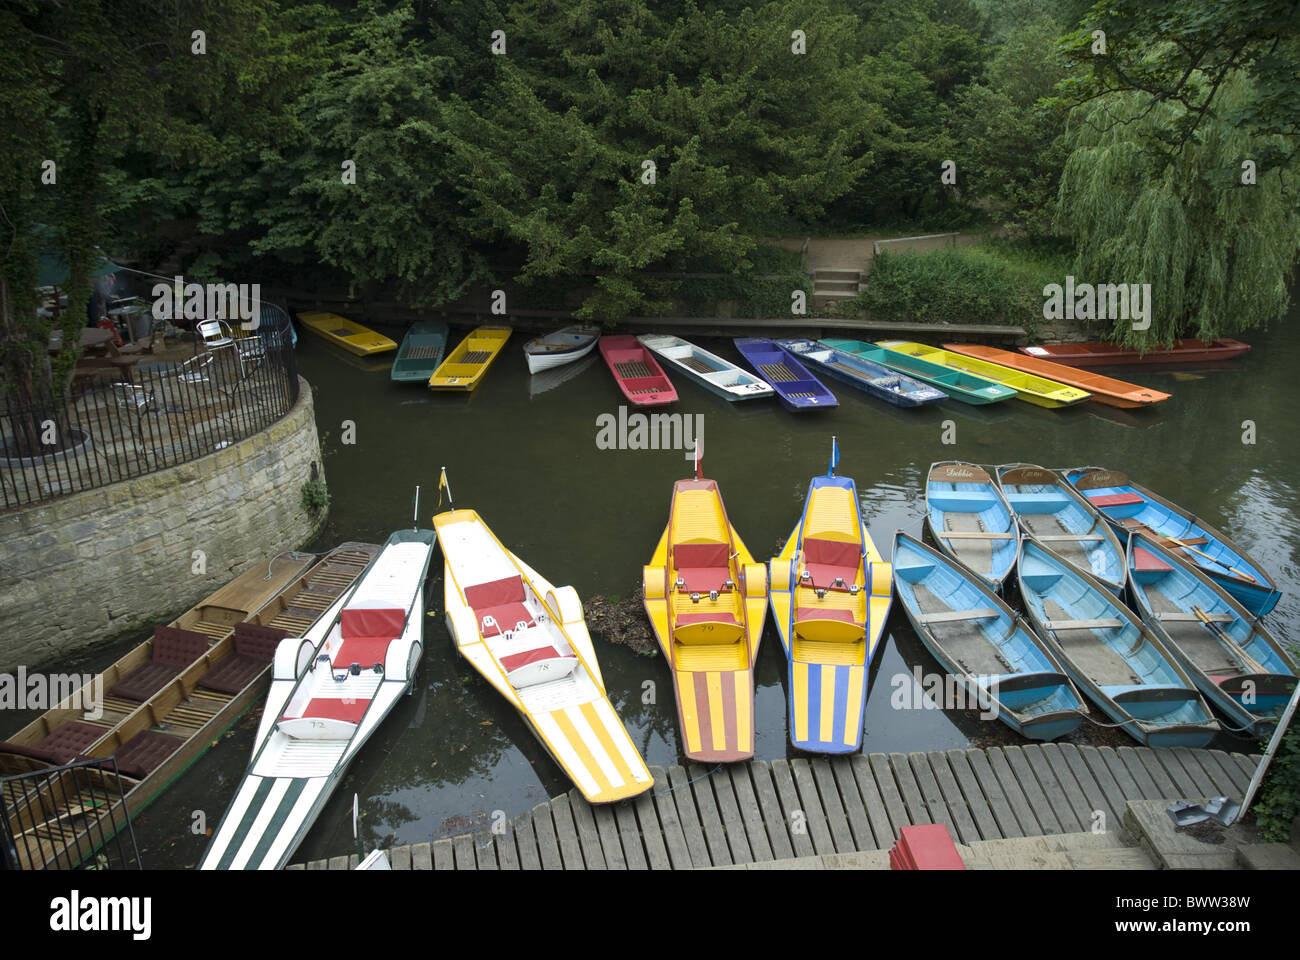 Boats Rowboats Punts River Magdalen College Oxford University UK britain british english england country scenic scenics scenery Stock Photo